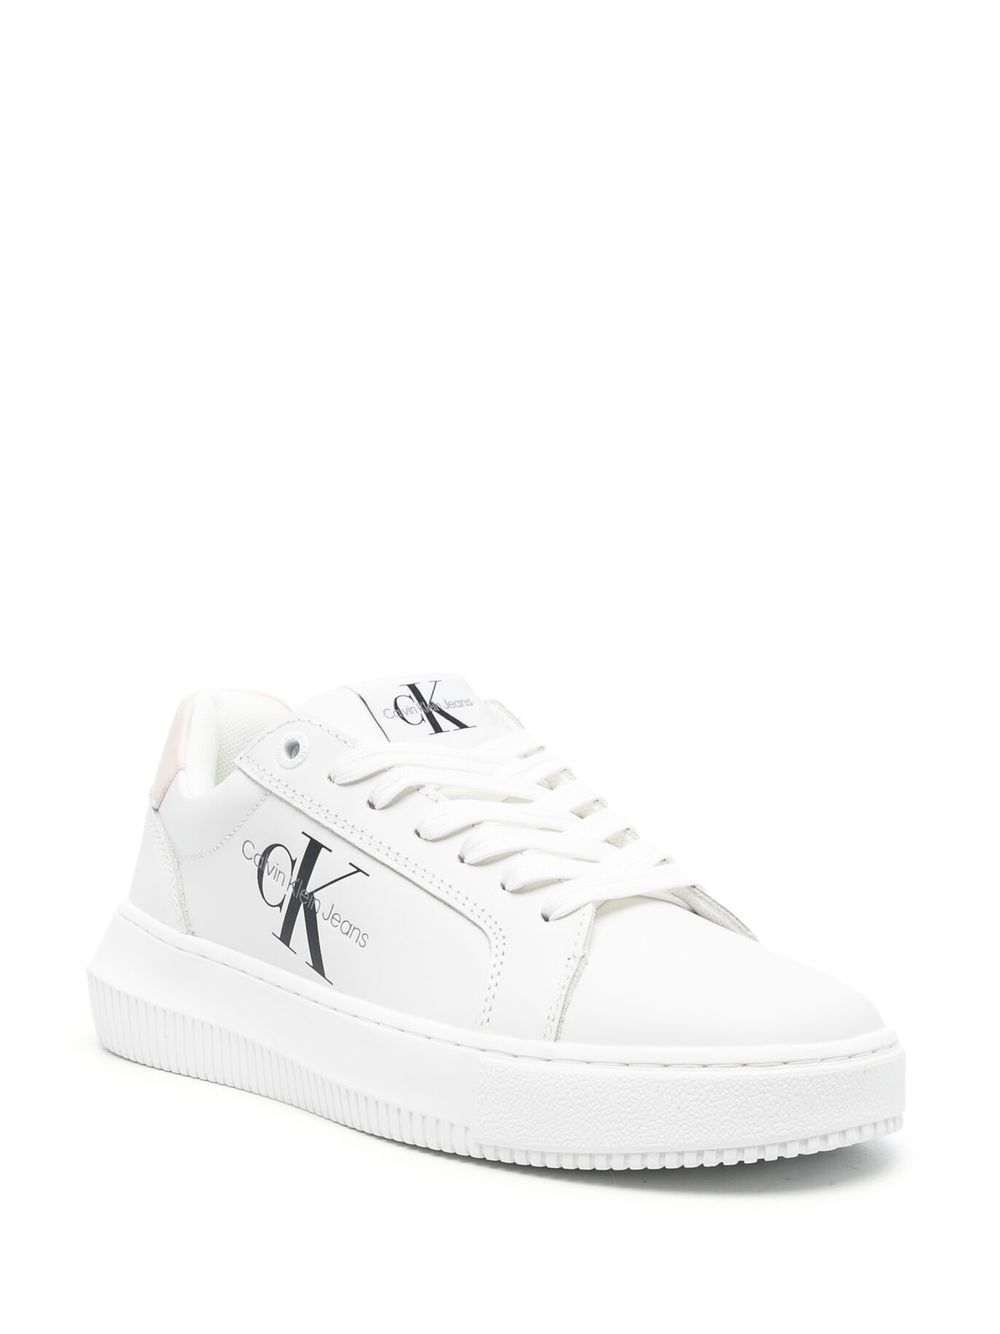 Image 2 of Calvin Klein logo-print lace-up sneakers